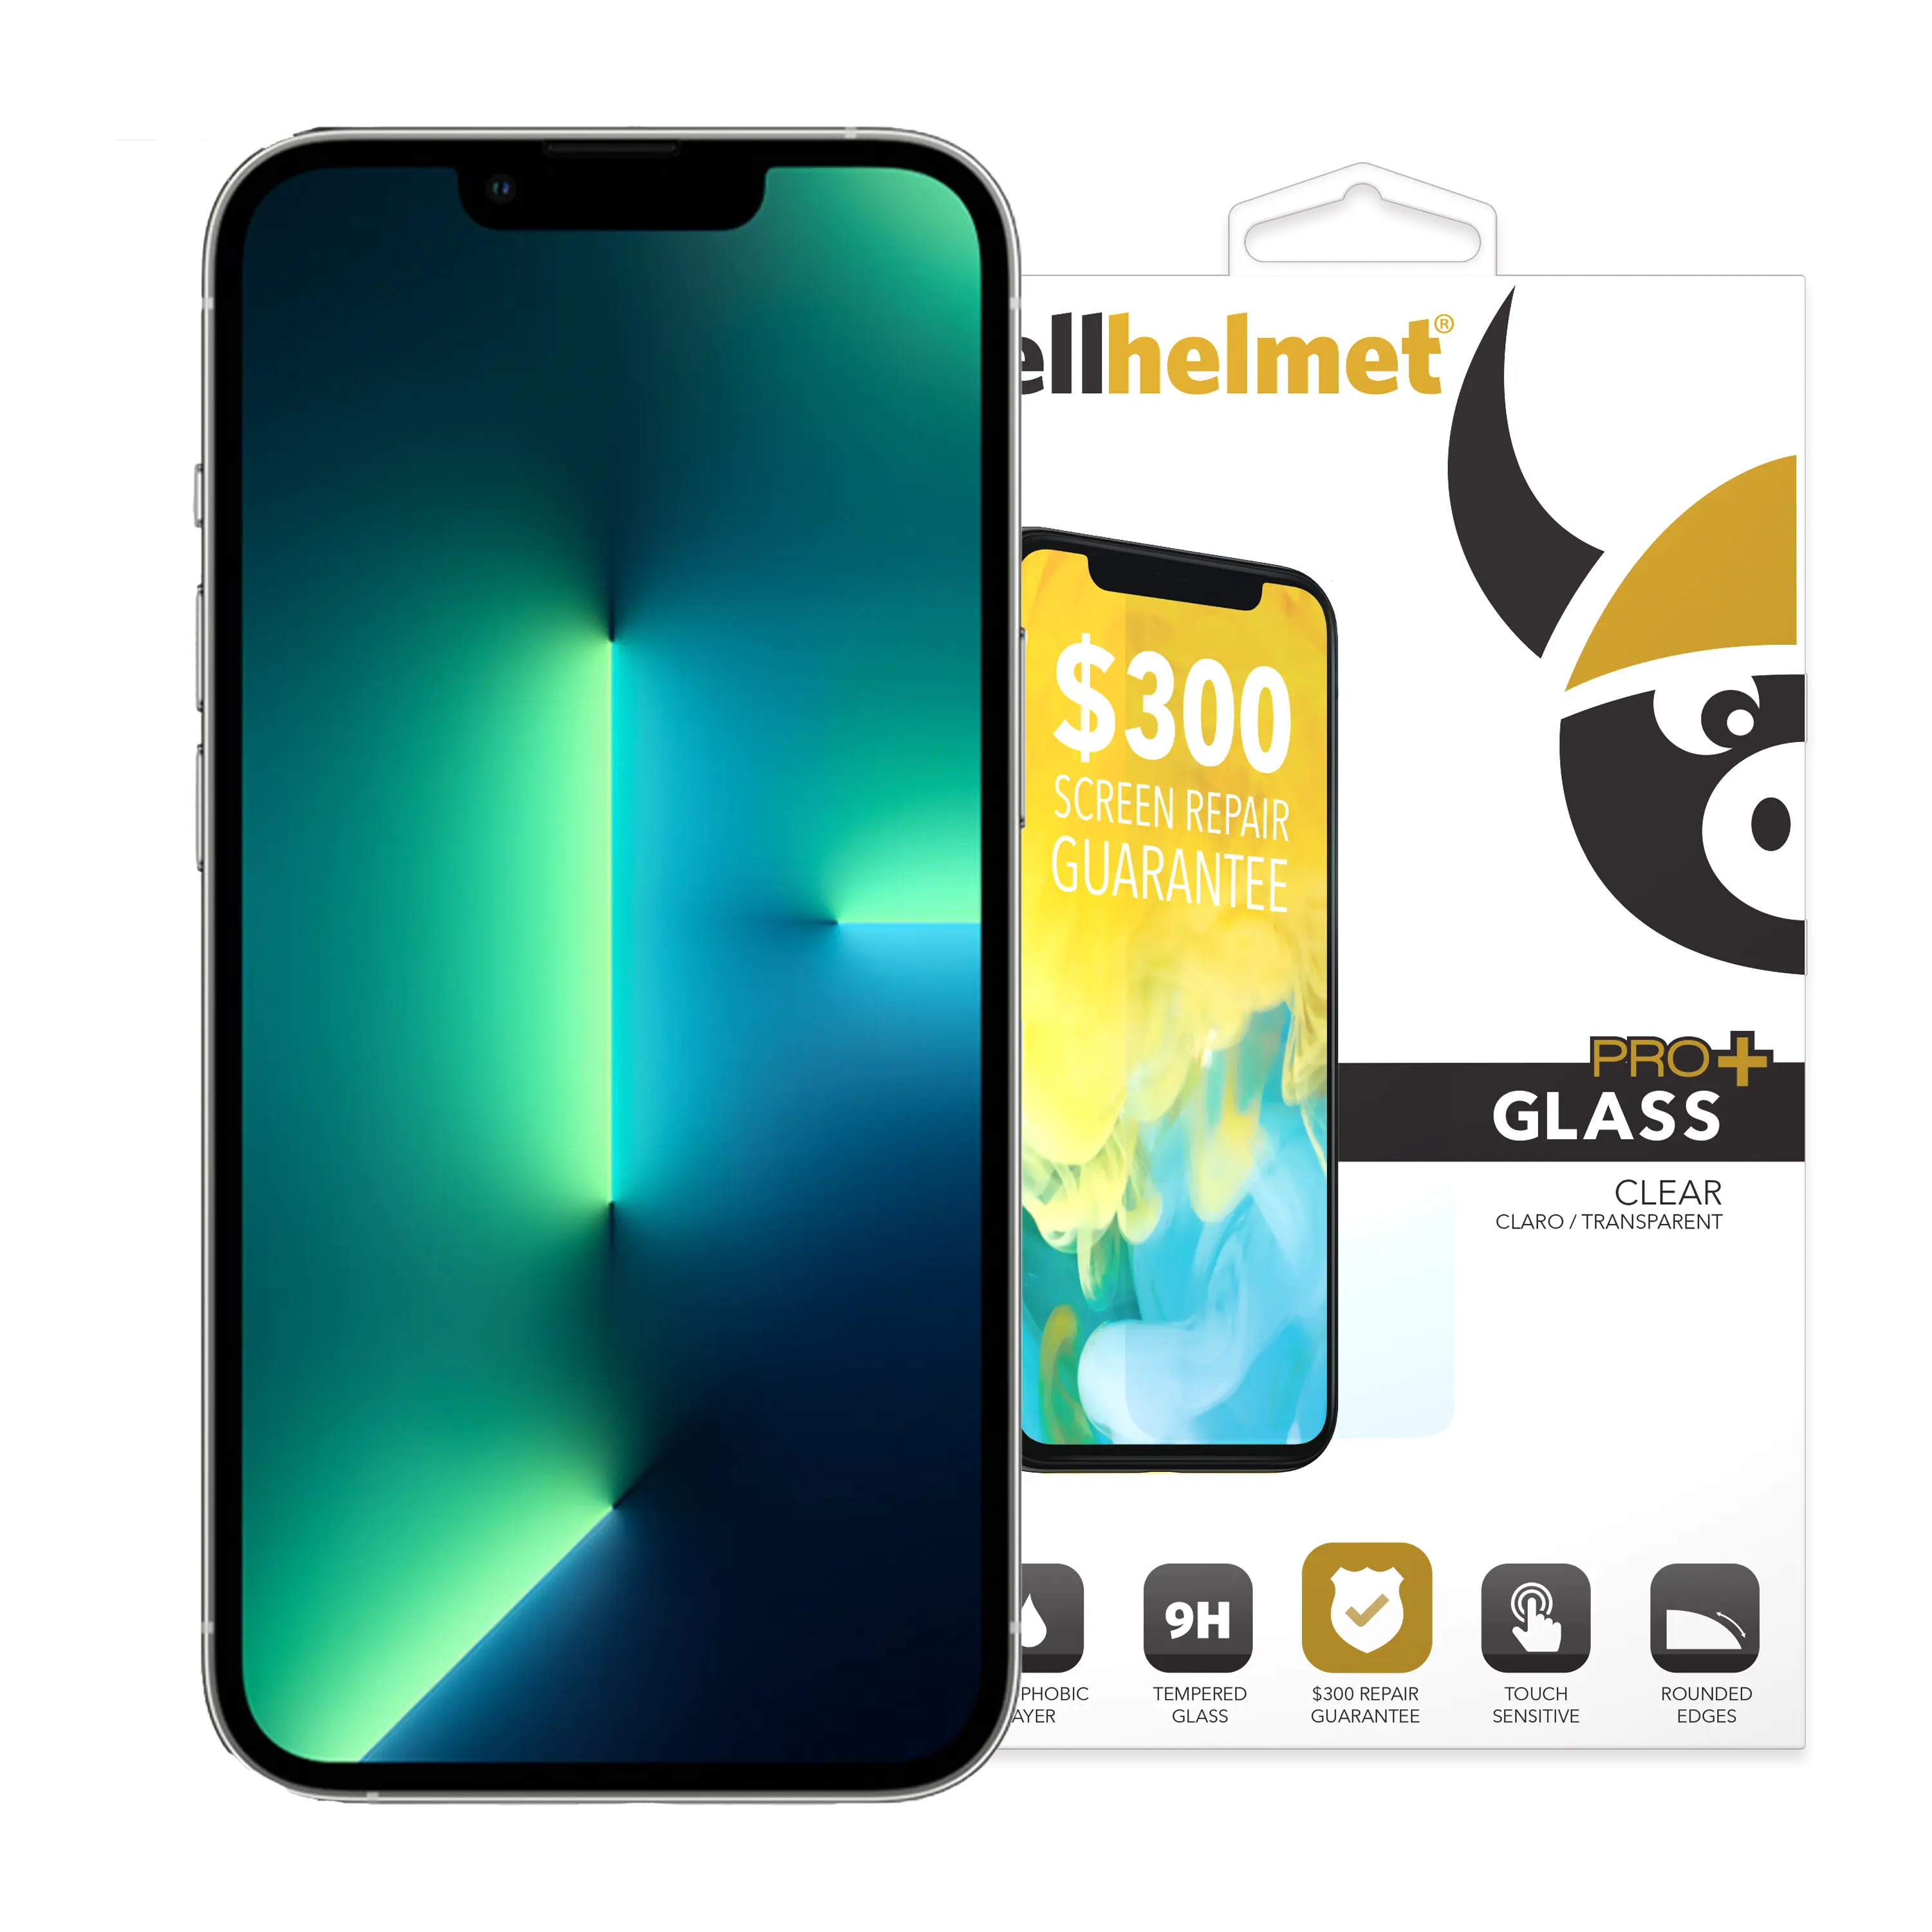 cellhelmet Tempered Glass for iPhone 13 Pro Max with Insurance